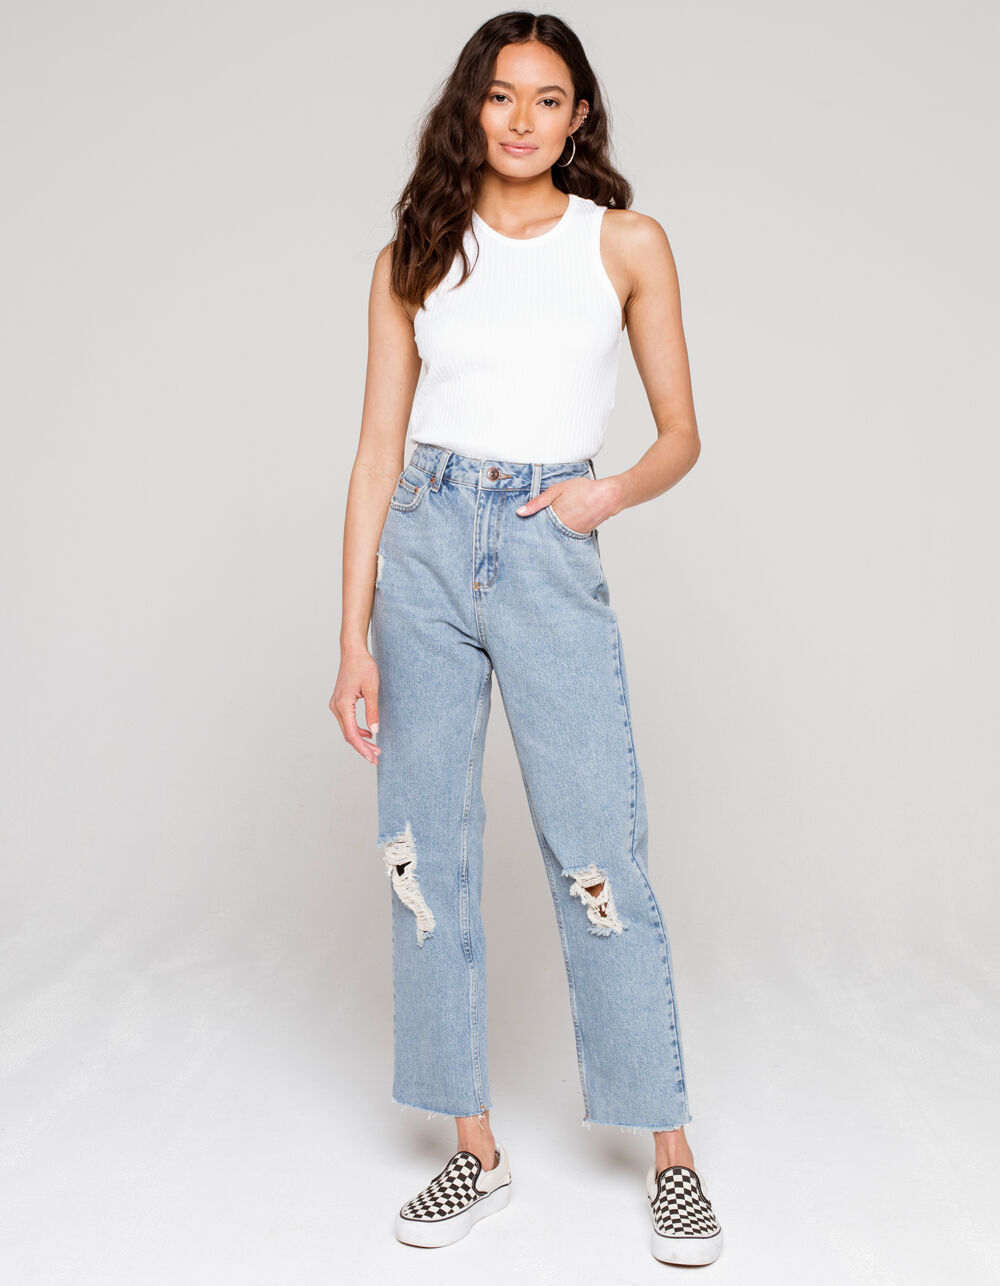 BDG Urban Outfitters Pax Tapered Womens Destroyed Jeans - LIGHT ...